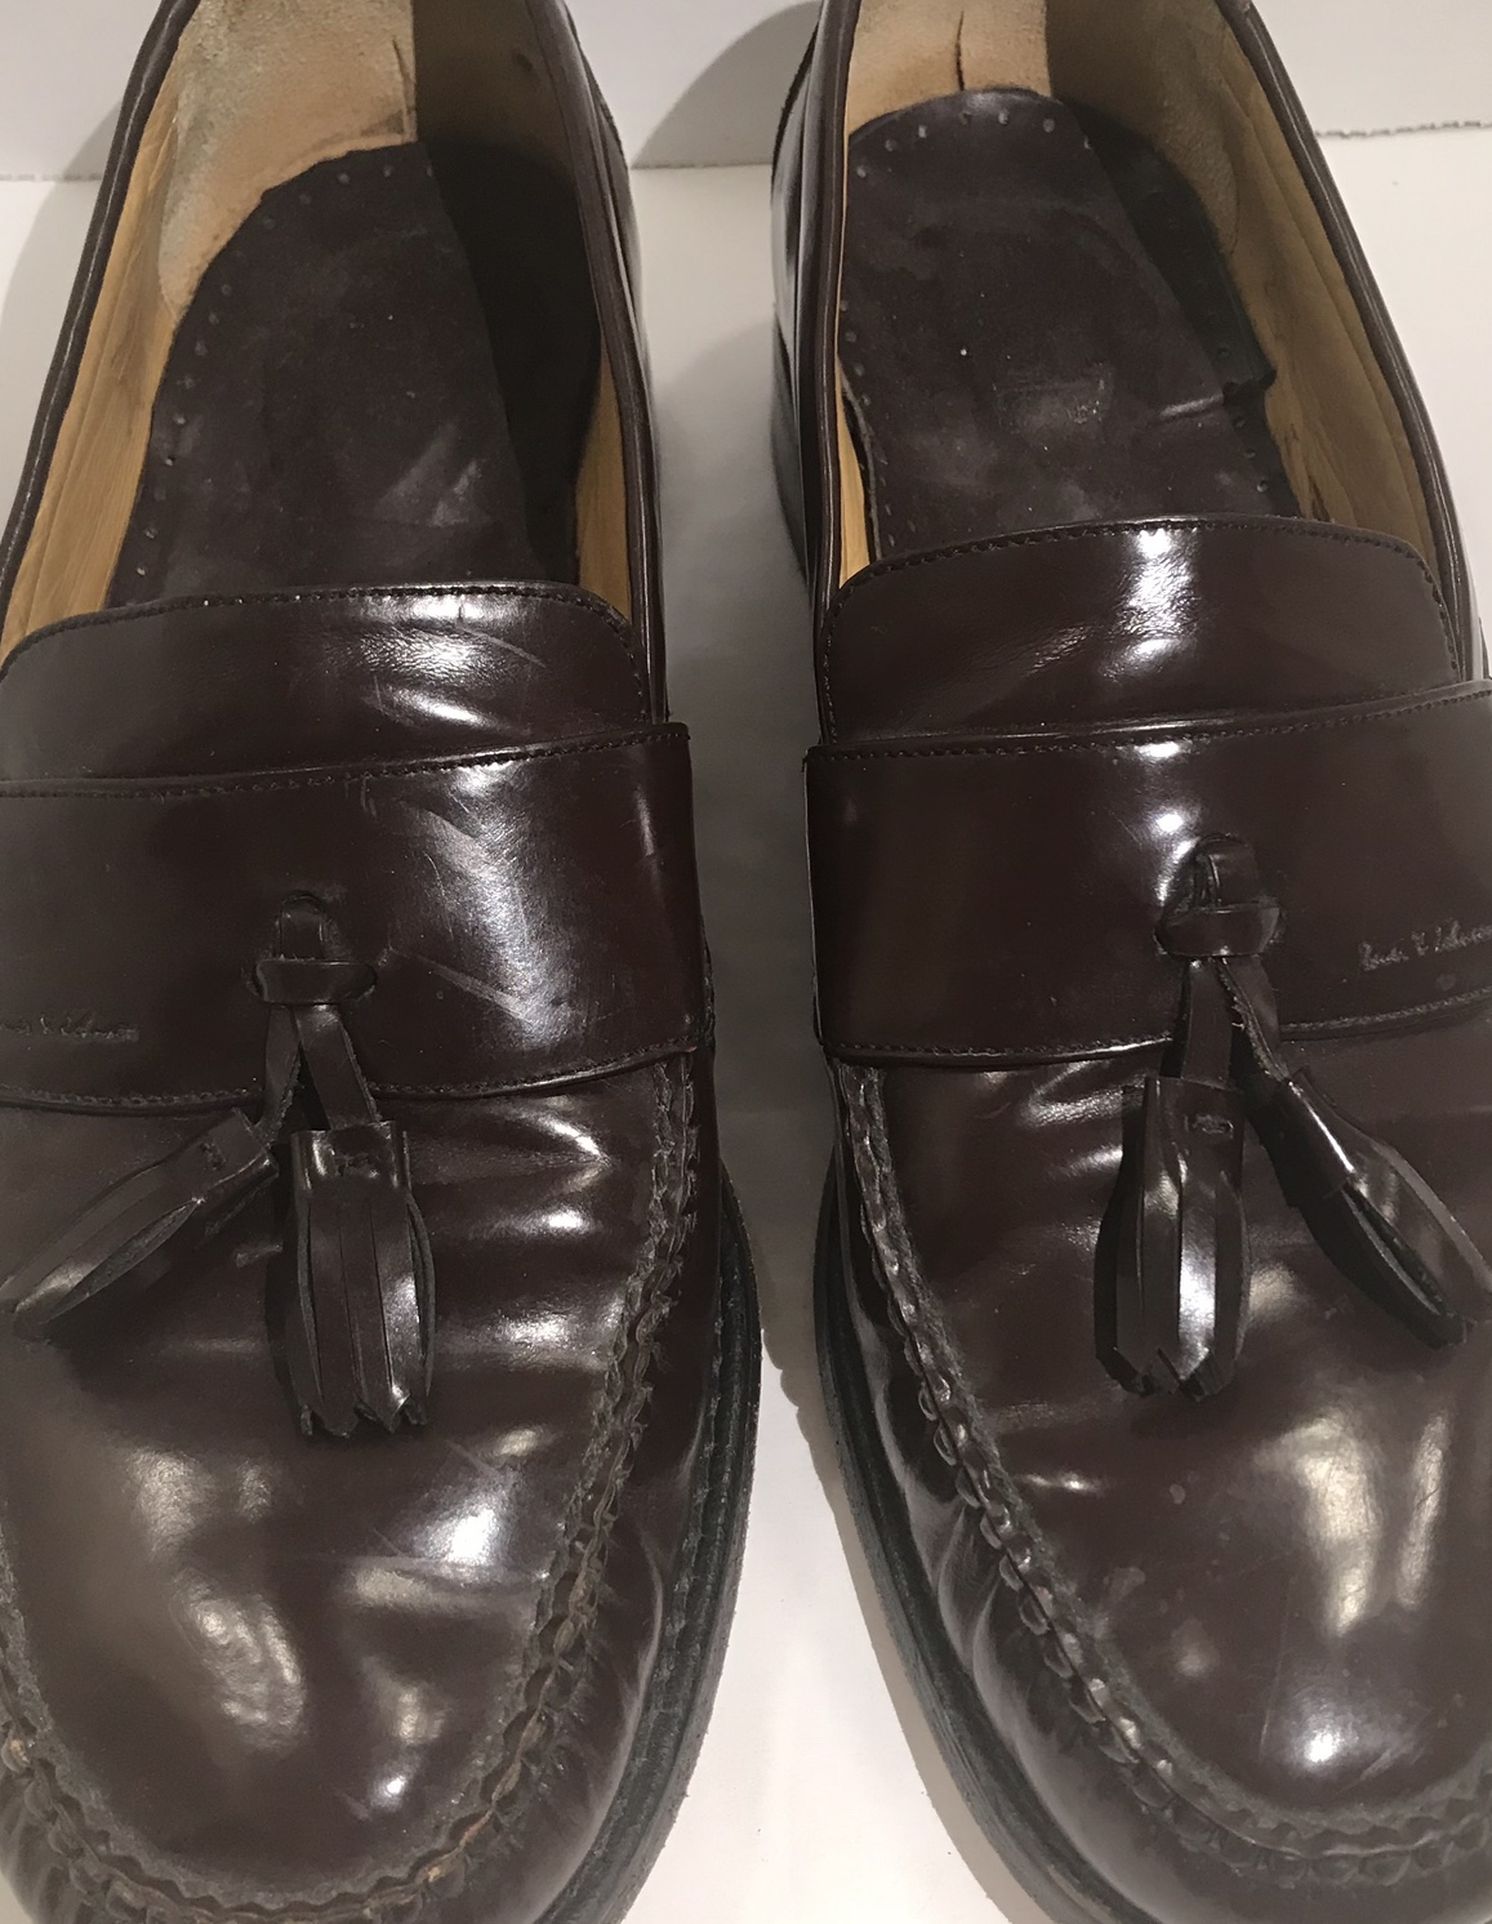 Tauer & Johnson Leather Tassel Loafer Handcrafted Shoes Mens 10 2E